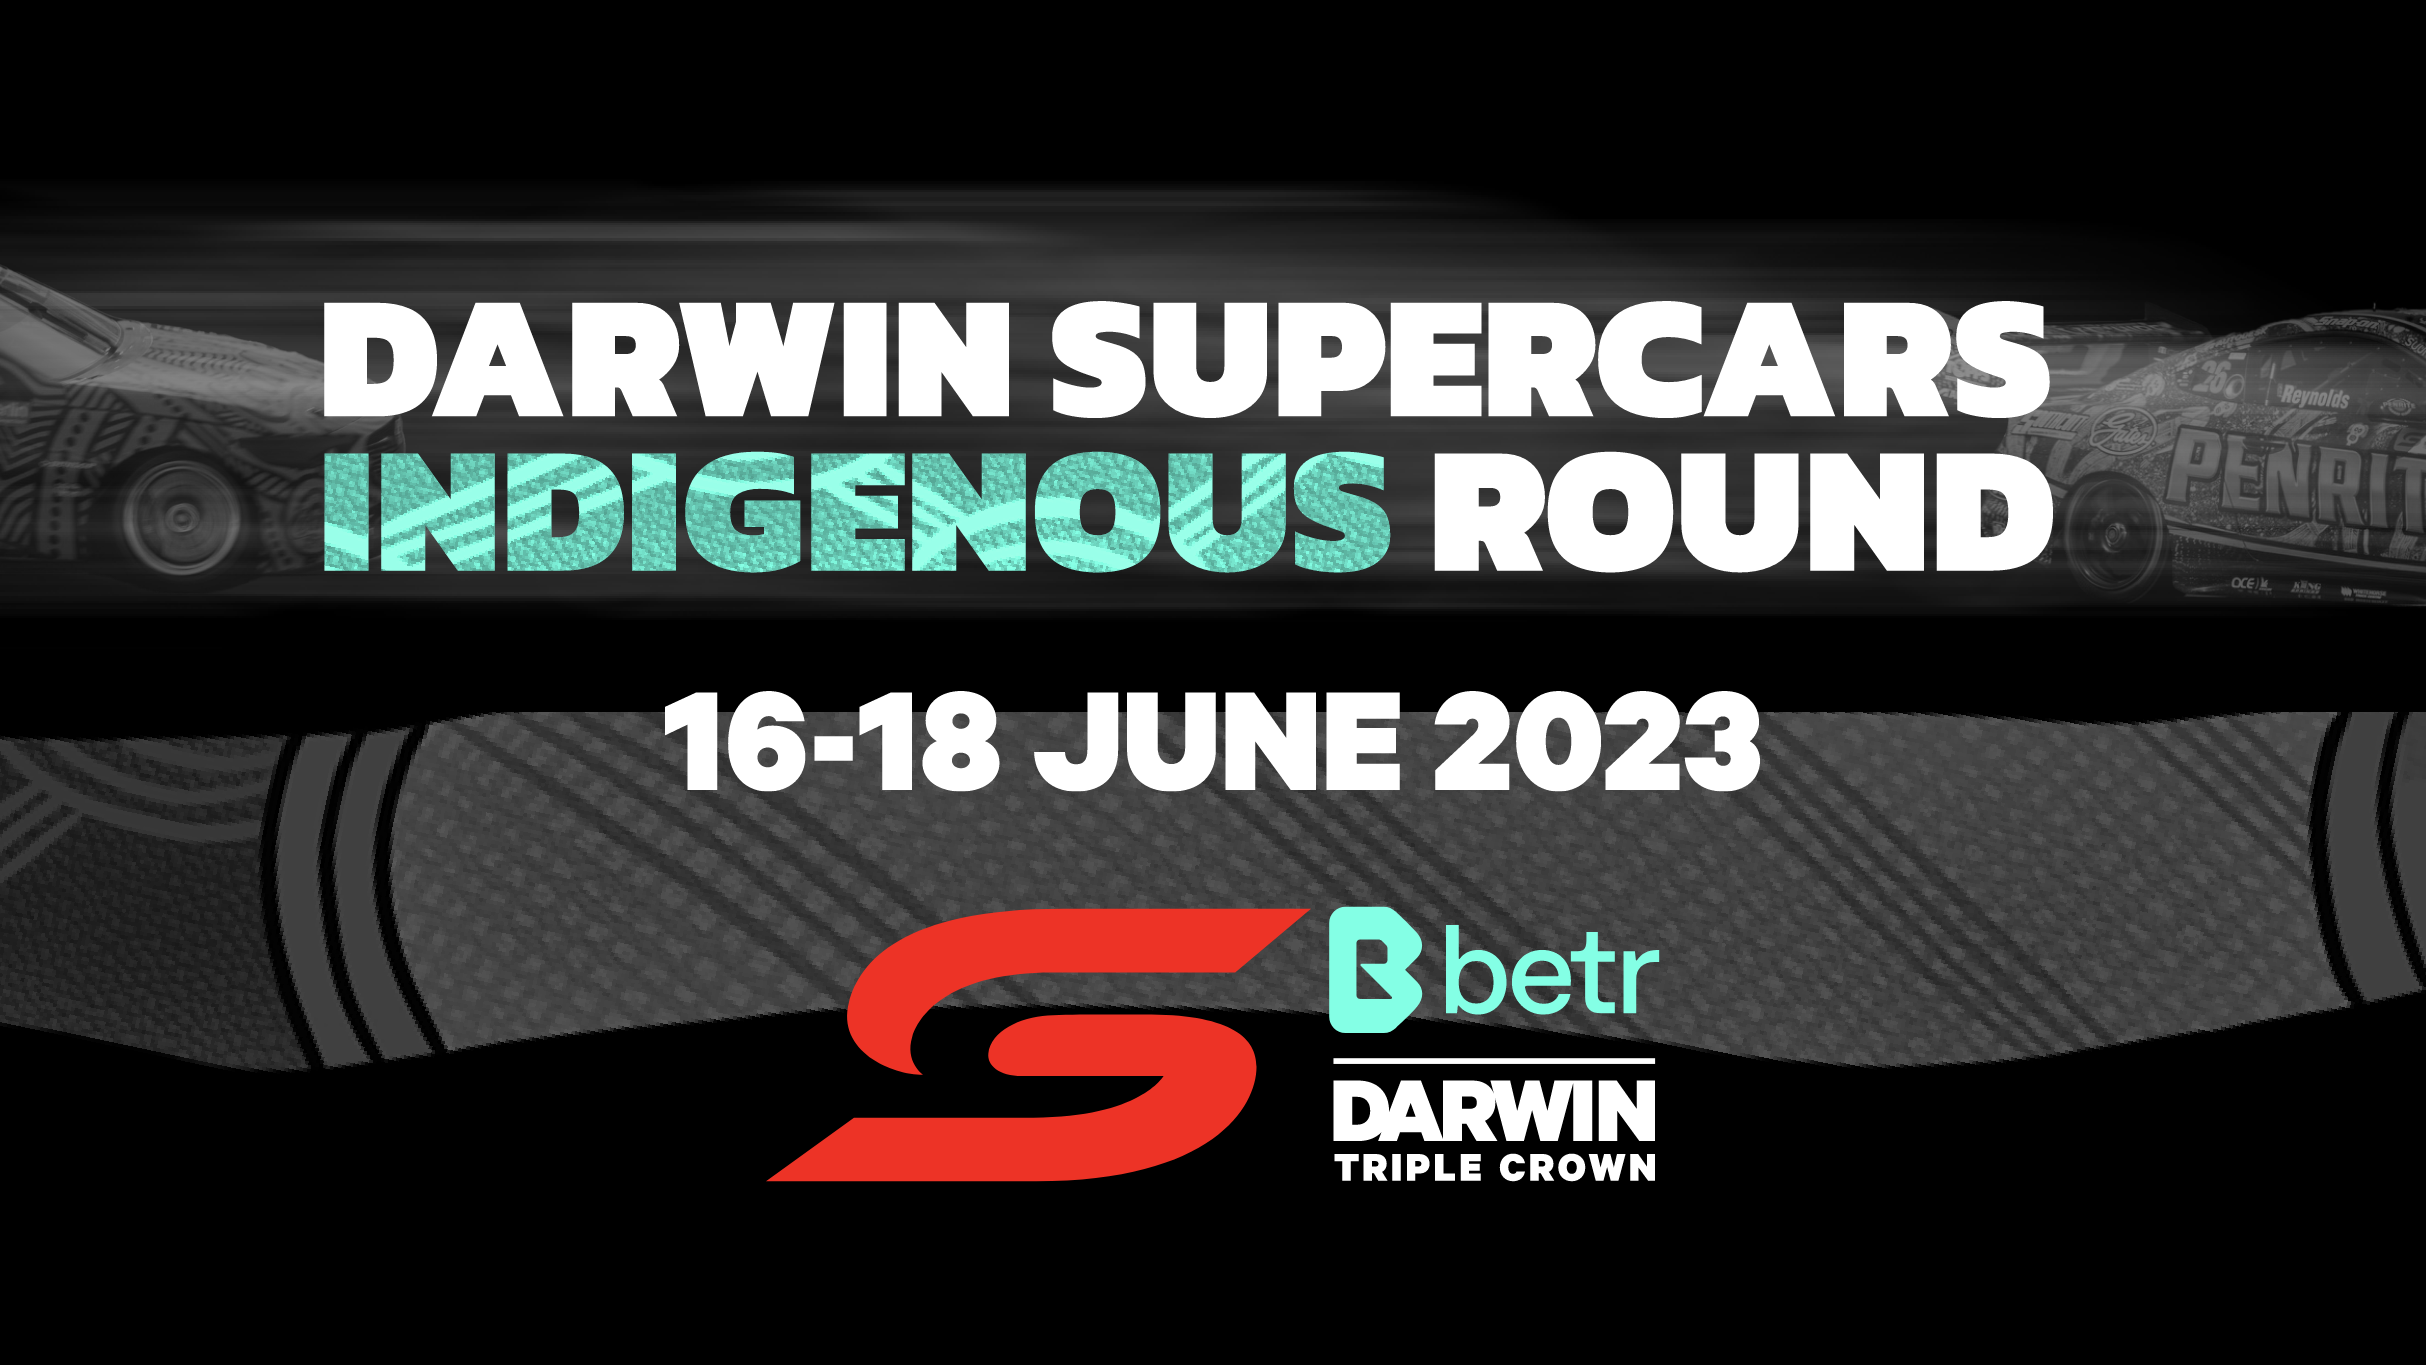 Image used with permission from Ticketmaster | betr Darwin Triple Crown - 3-Day Monster Platform tickets